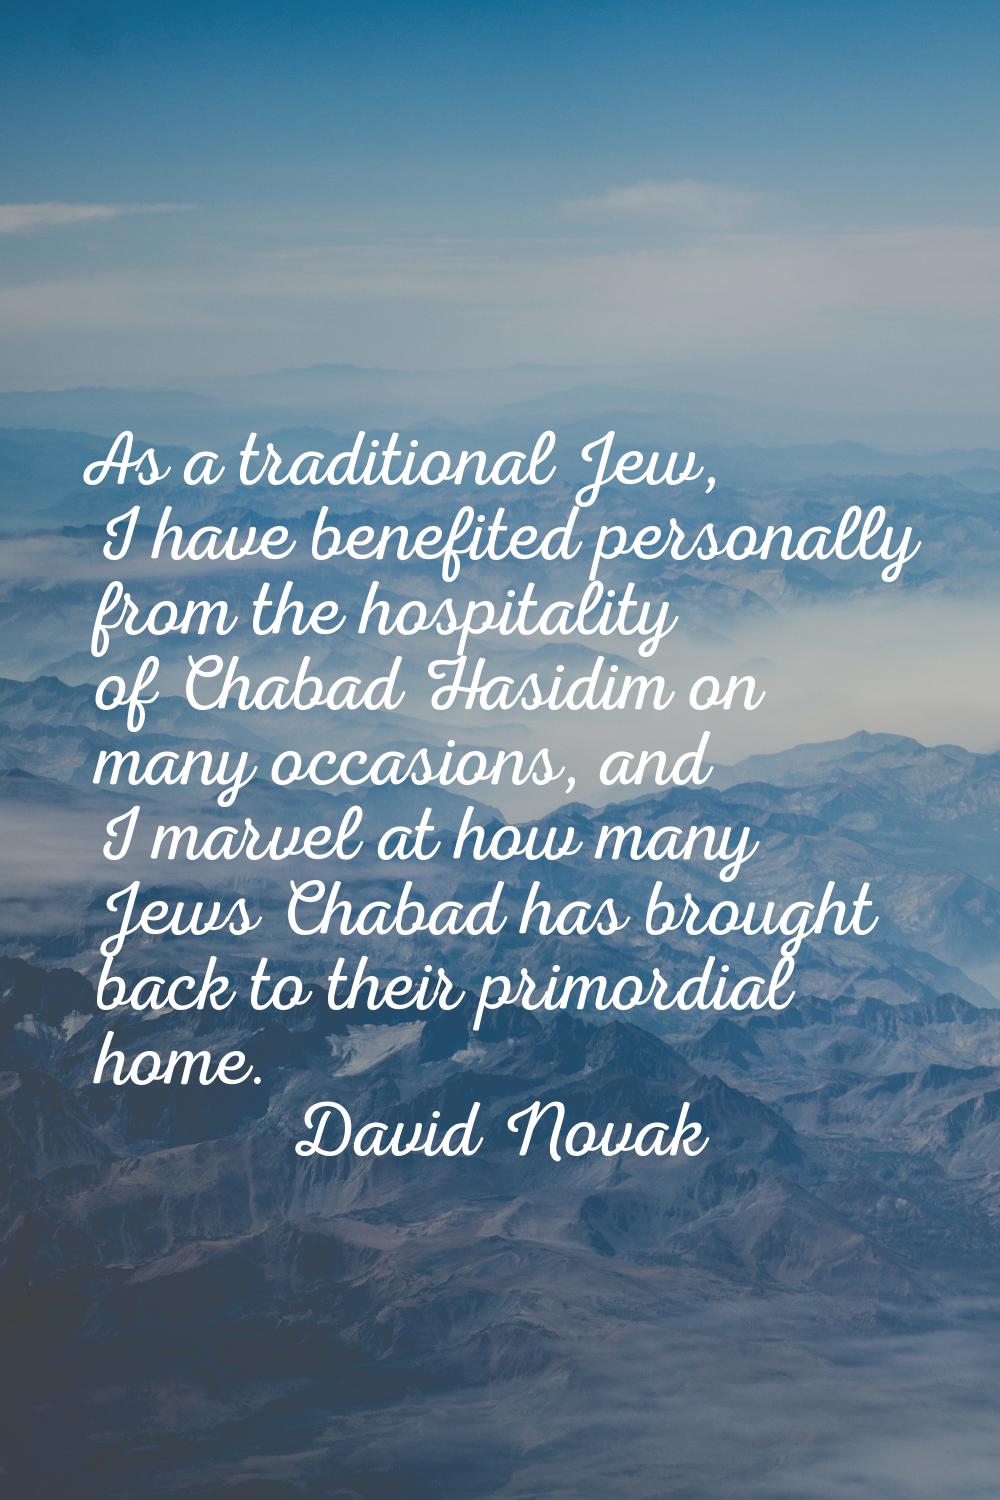 As a traditional Jew, I have benefited personally from the hospitality of Chabad Hasidim on many oc